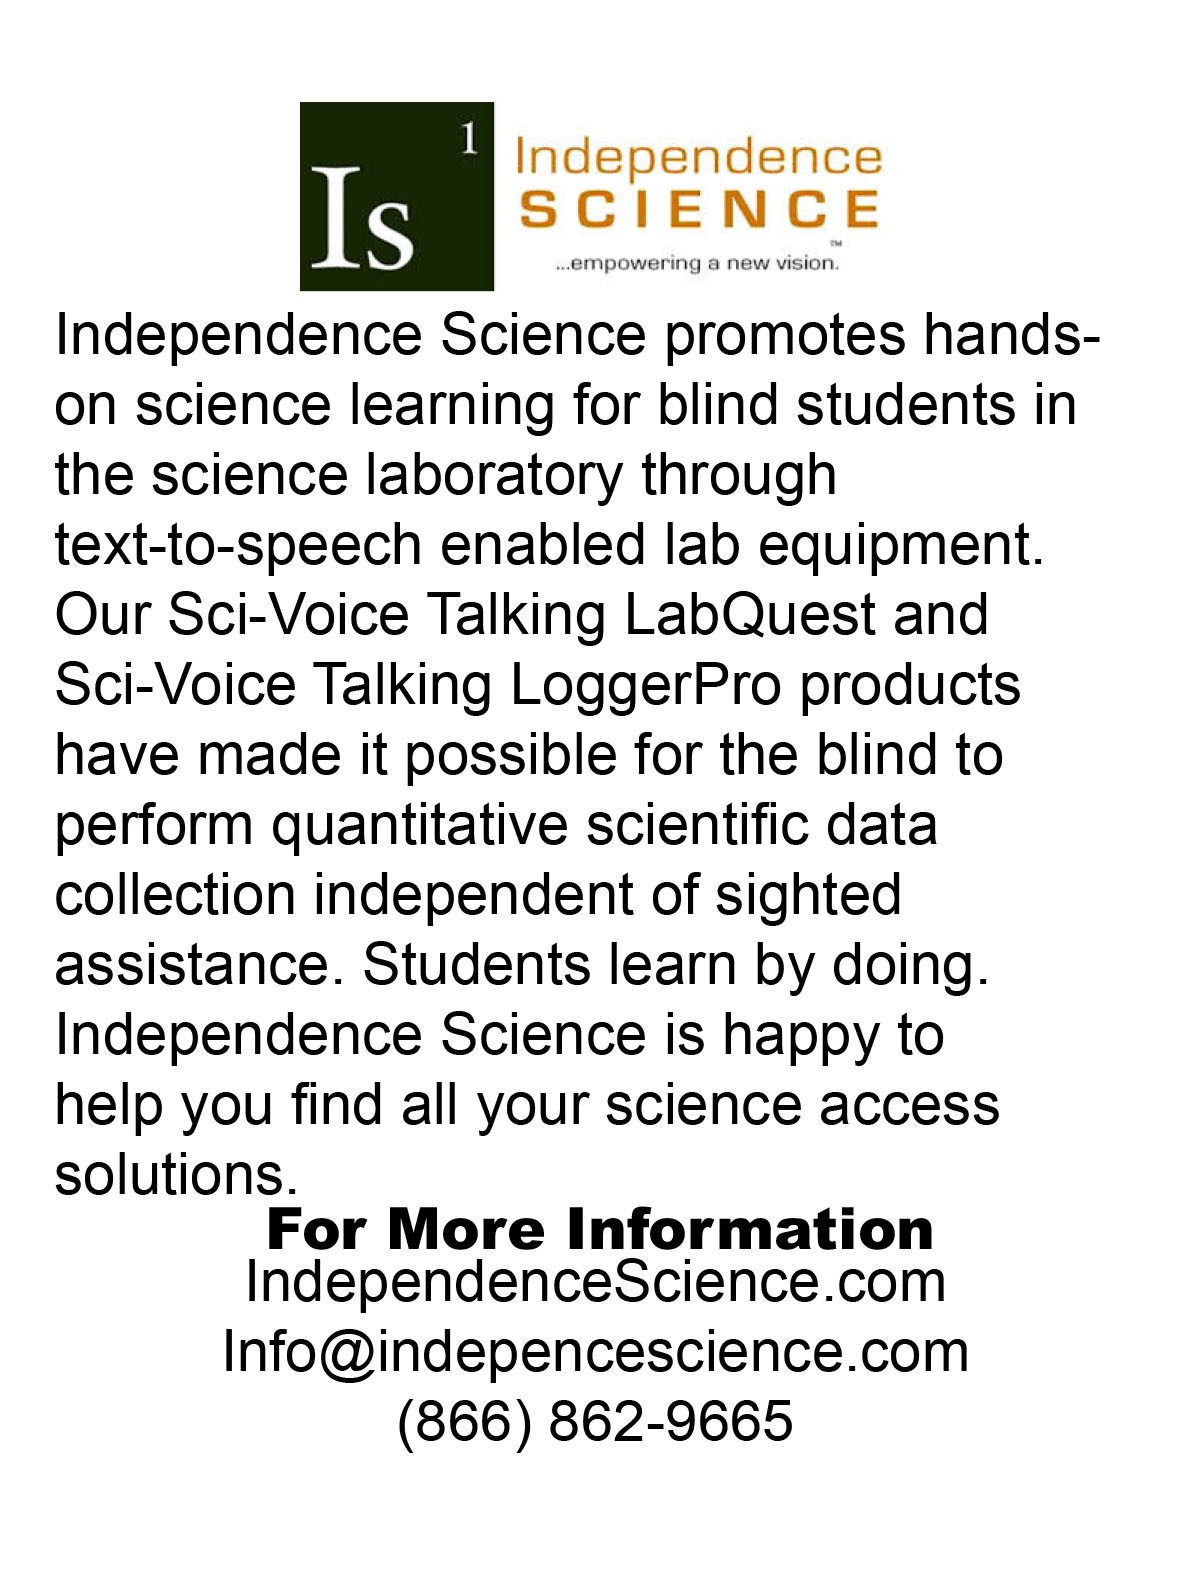 Independence Science – Empowering a new vision Independence Science promotes hands-on science learning for blind students in the science laboratory through text-to-speech enabled lab equipment. Our Sci-Voice Talking LabQuest and Sci-Voice Talking LoggerPro products have made it possible for the blind to perform quantitative scientific data collection independent of sighted assistance. Students learn by doing. Independence Science is happy to help you find all your science access solutions. For more information: IndependenceScience.com | Info@indepencescience.com | (866) 862-9665.